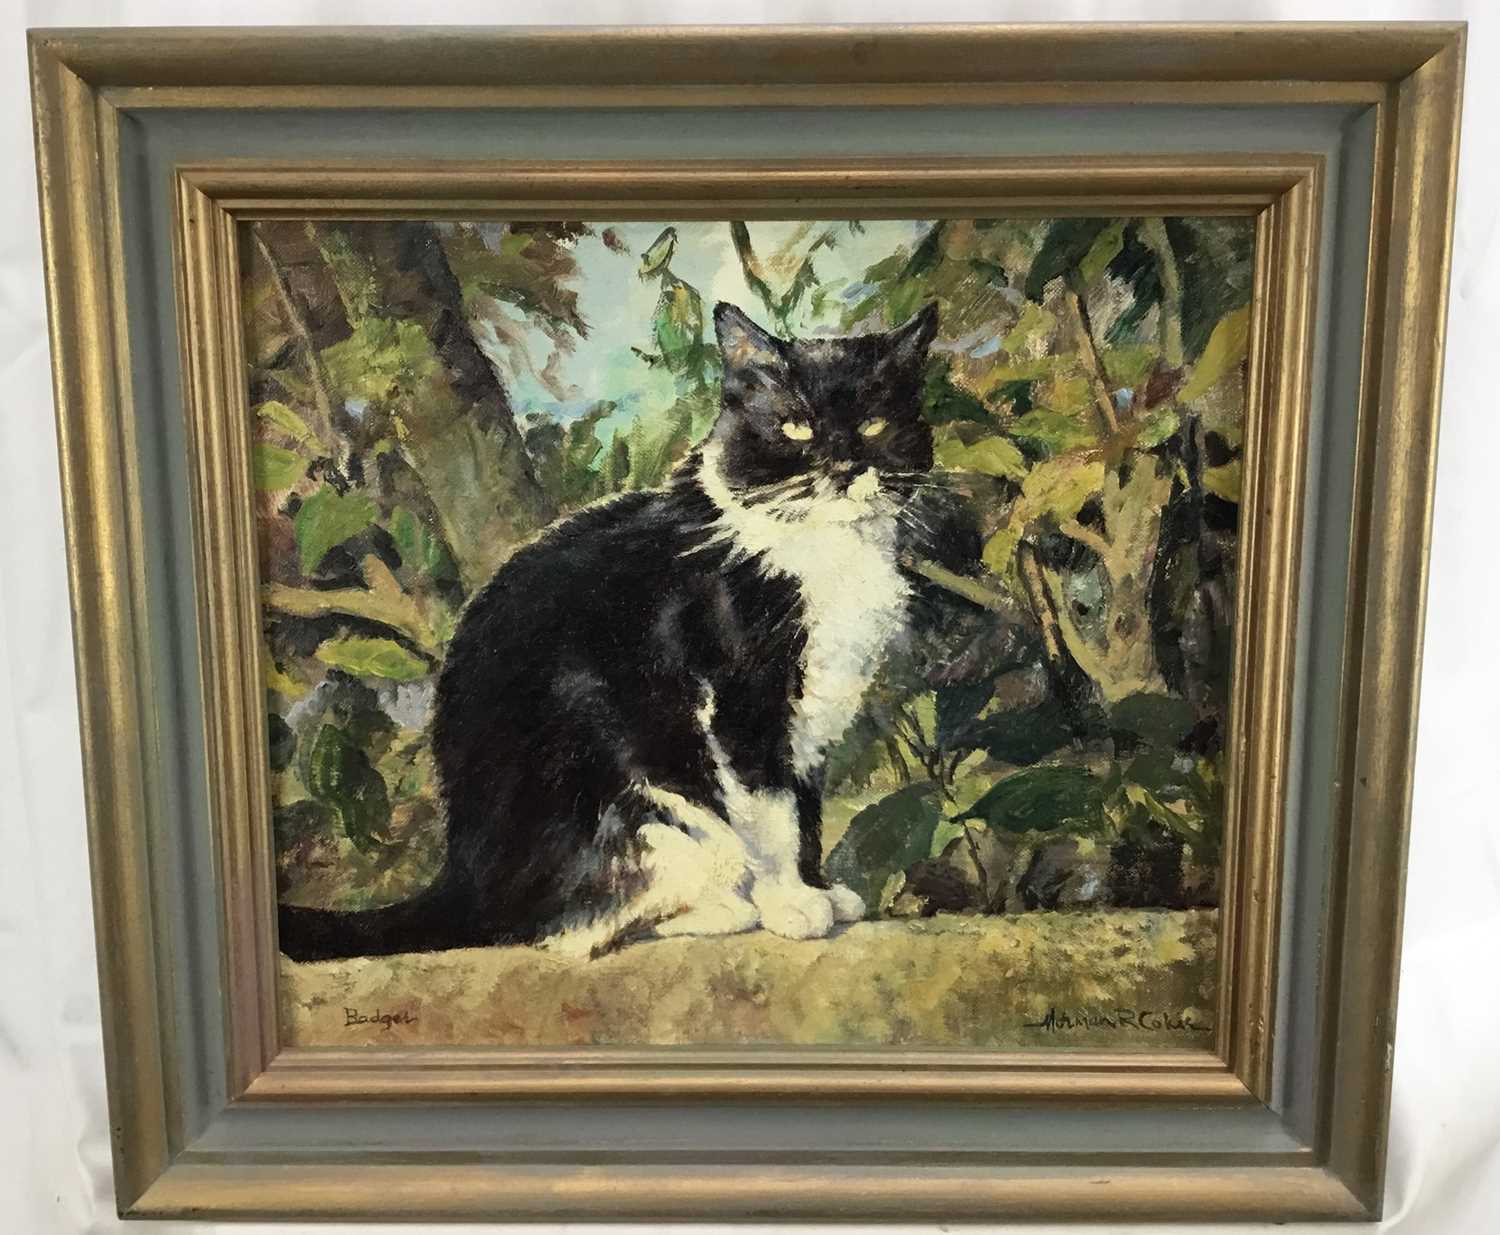 Norman Coker, contemporary, oil on board, 'Badger', signed and titled, 34 x 39cm, framed